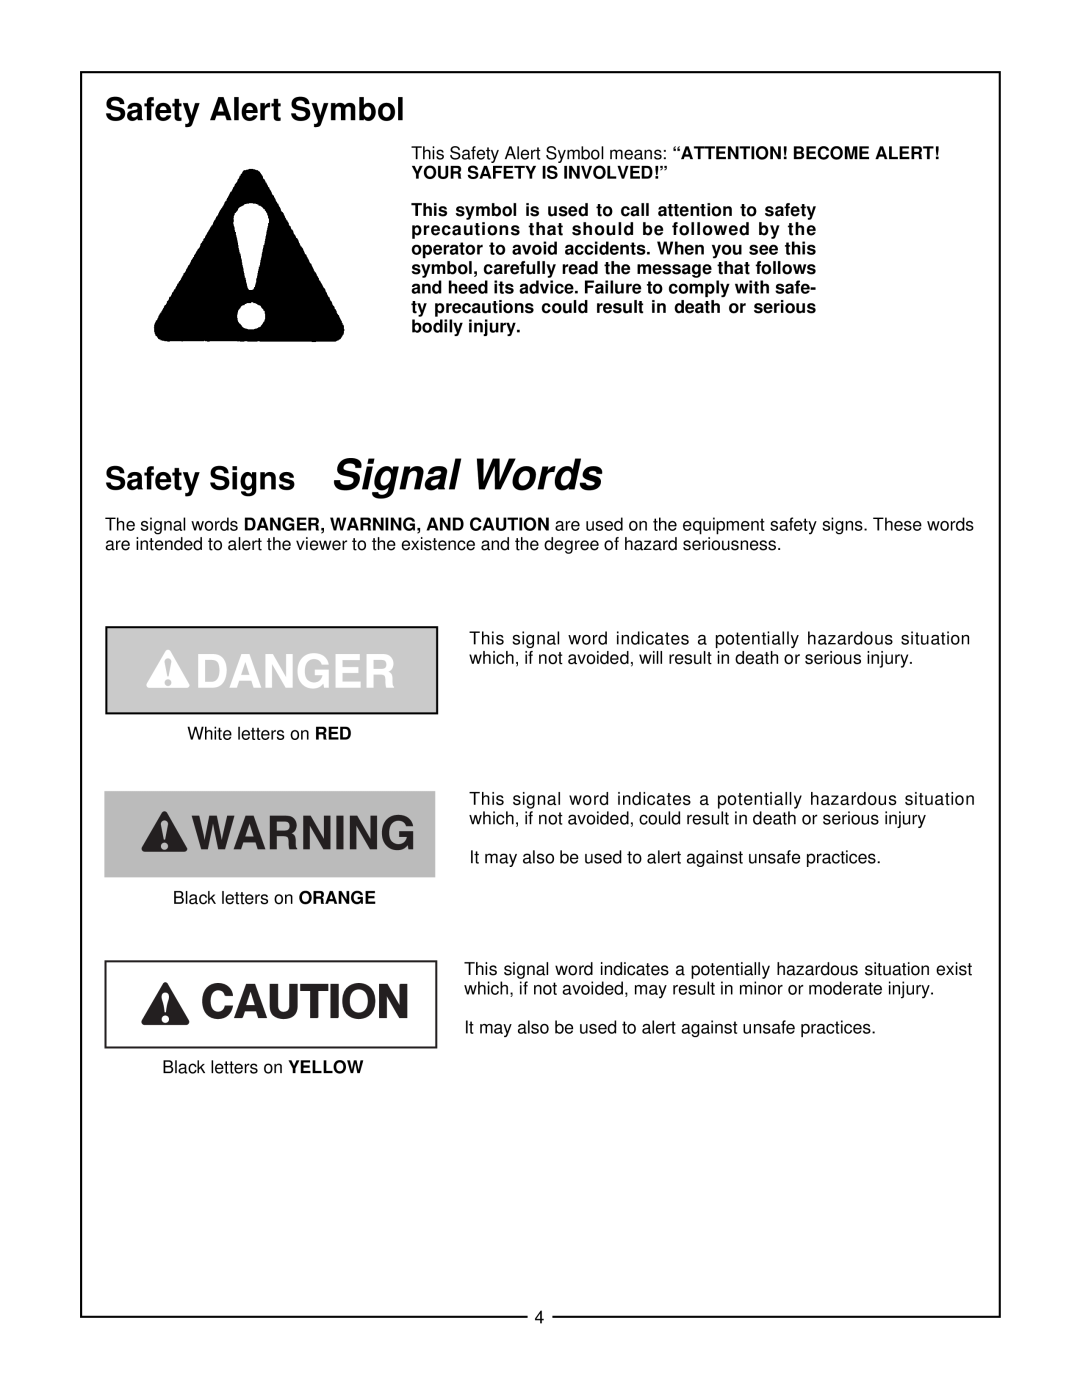 Bush Hog Estate Series manual Safety Alert Symbol, Safety Signs Signal Words, Your Safety Is Involved!” 